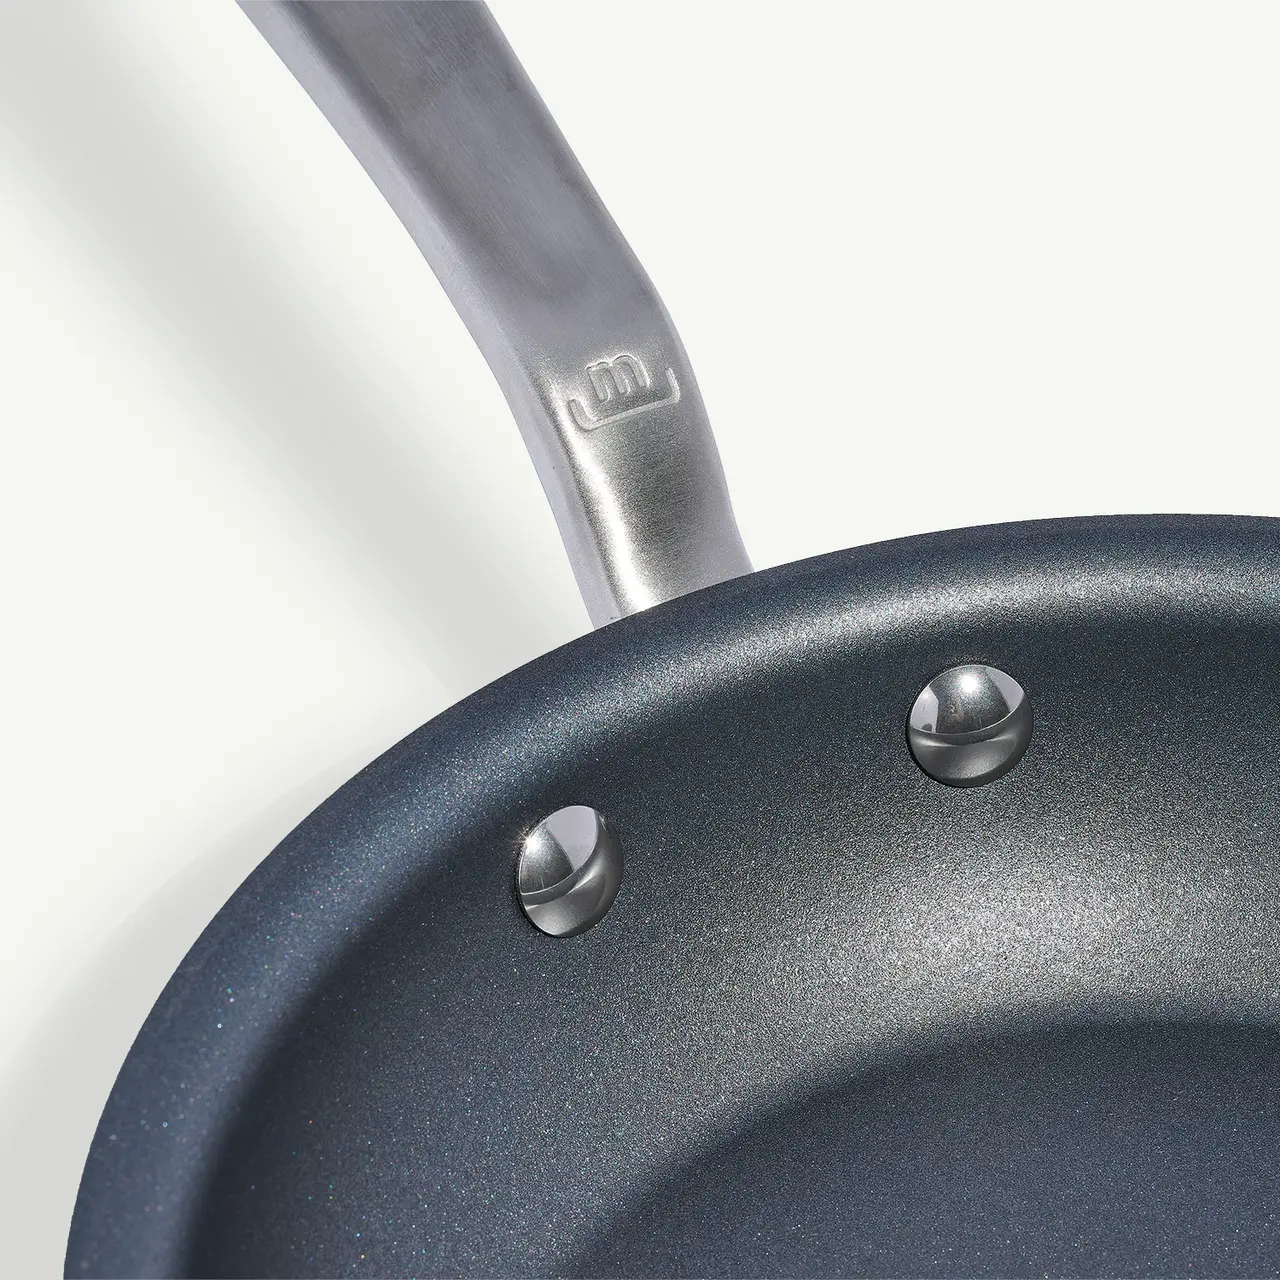 A close-up of a non-stick frying pan with a metal handle, focusing on the interior surface and rivets attaching the handle.